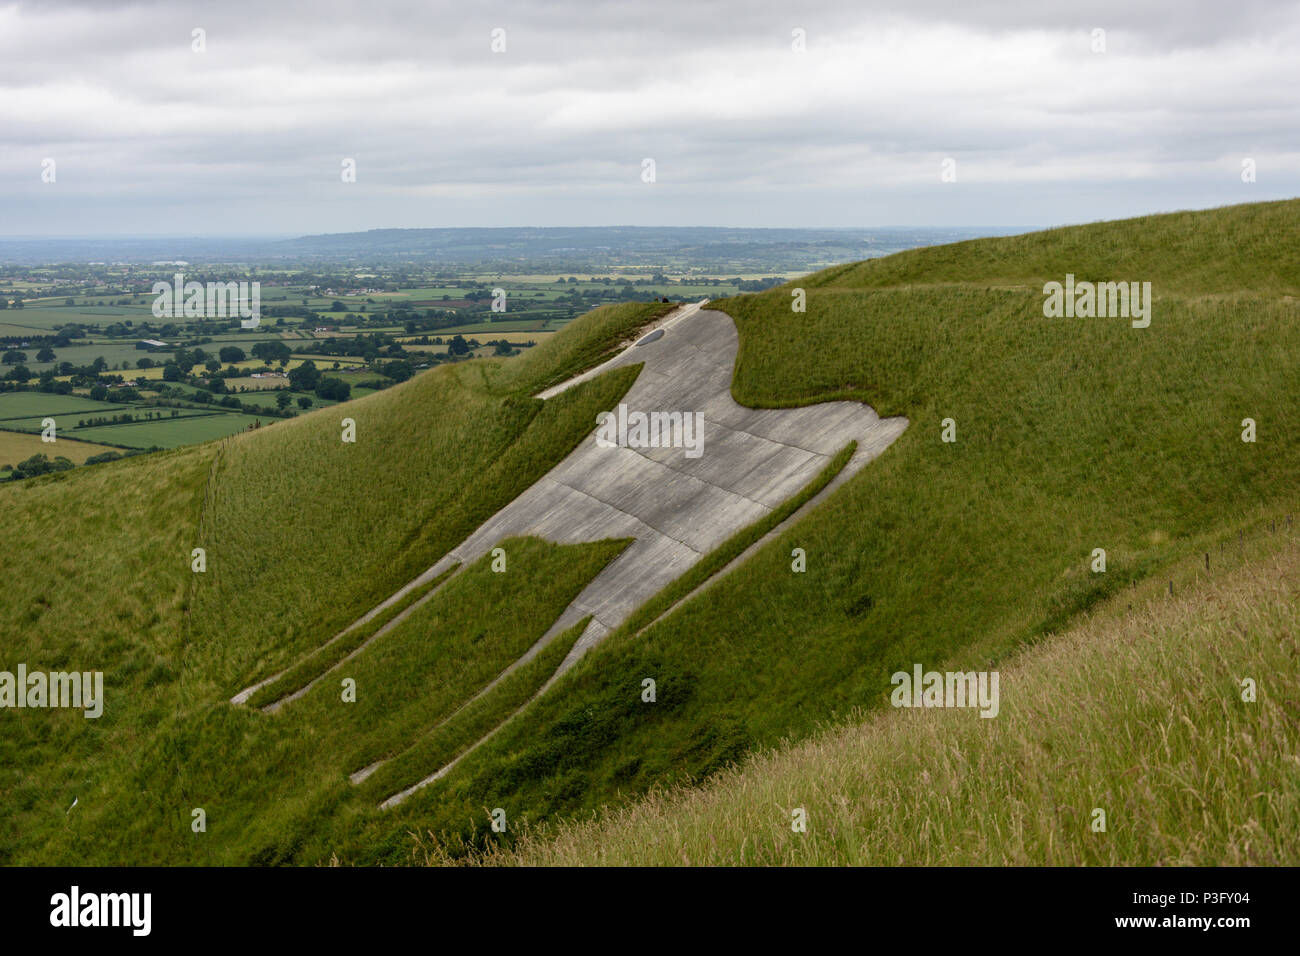 Westbury white horse looking grey and dingy in need of a clean up. Stock Photo